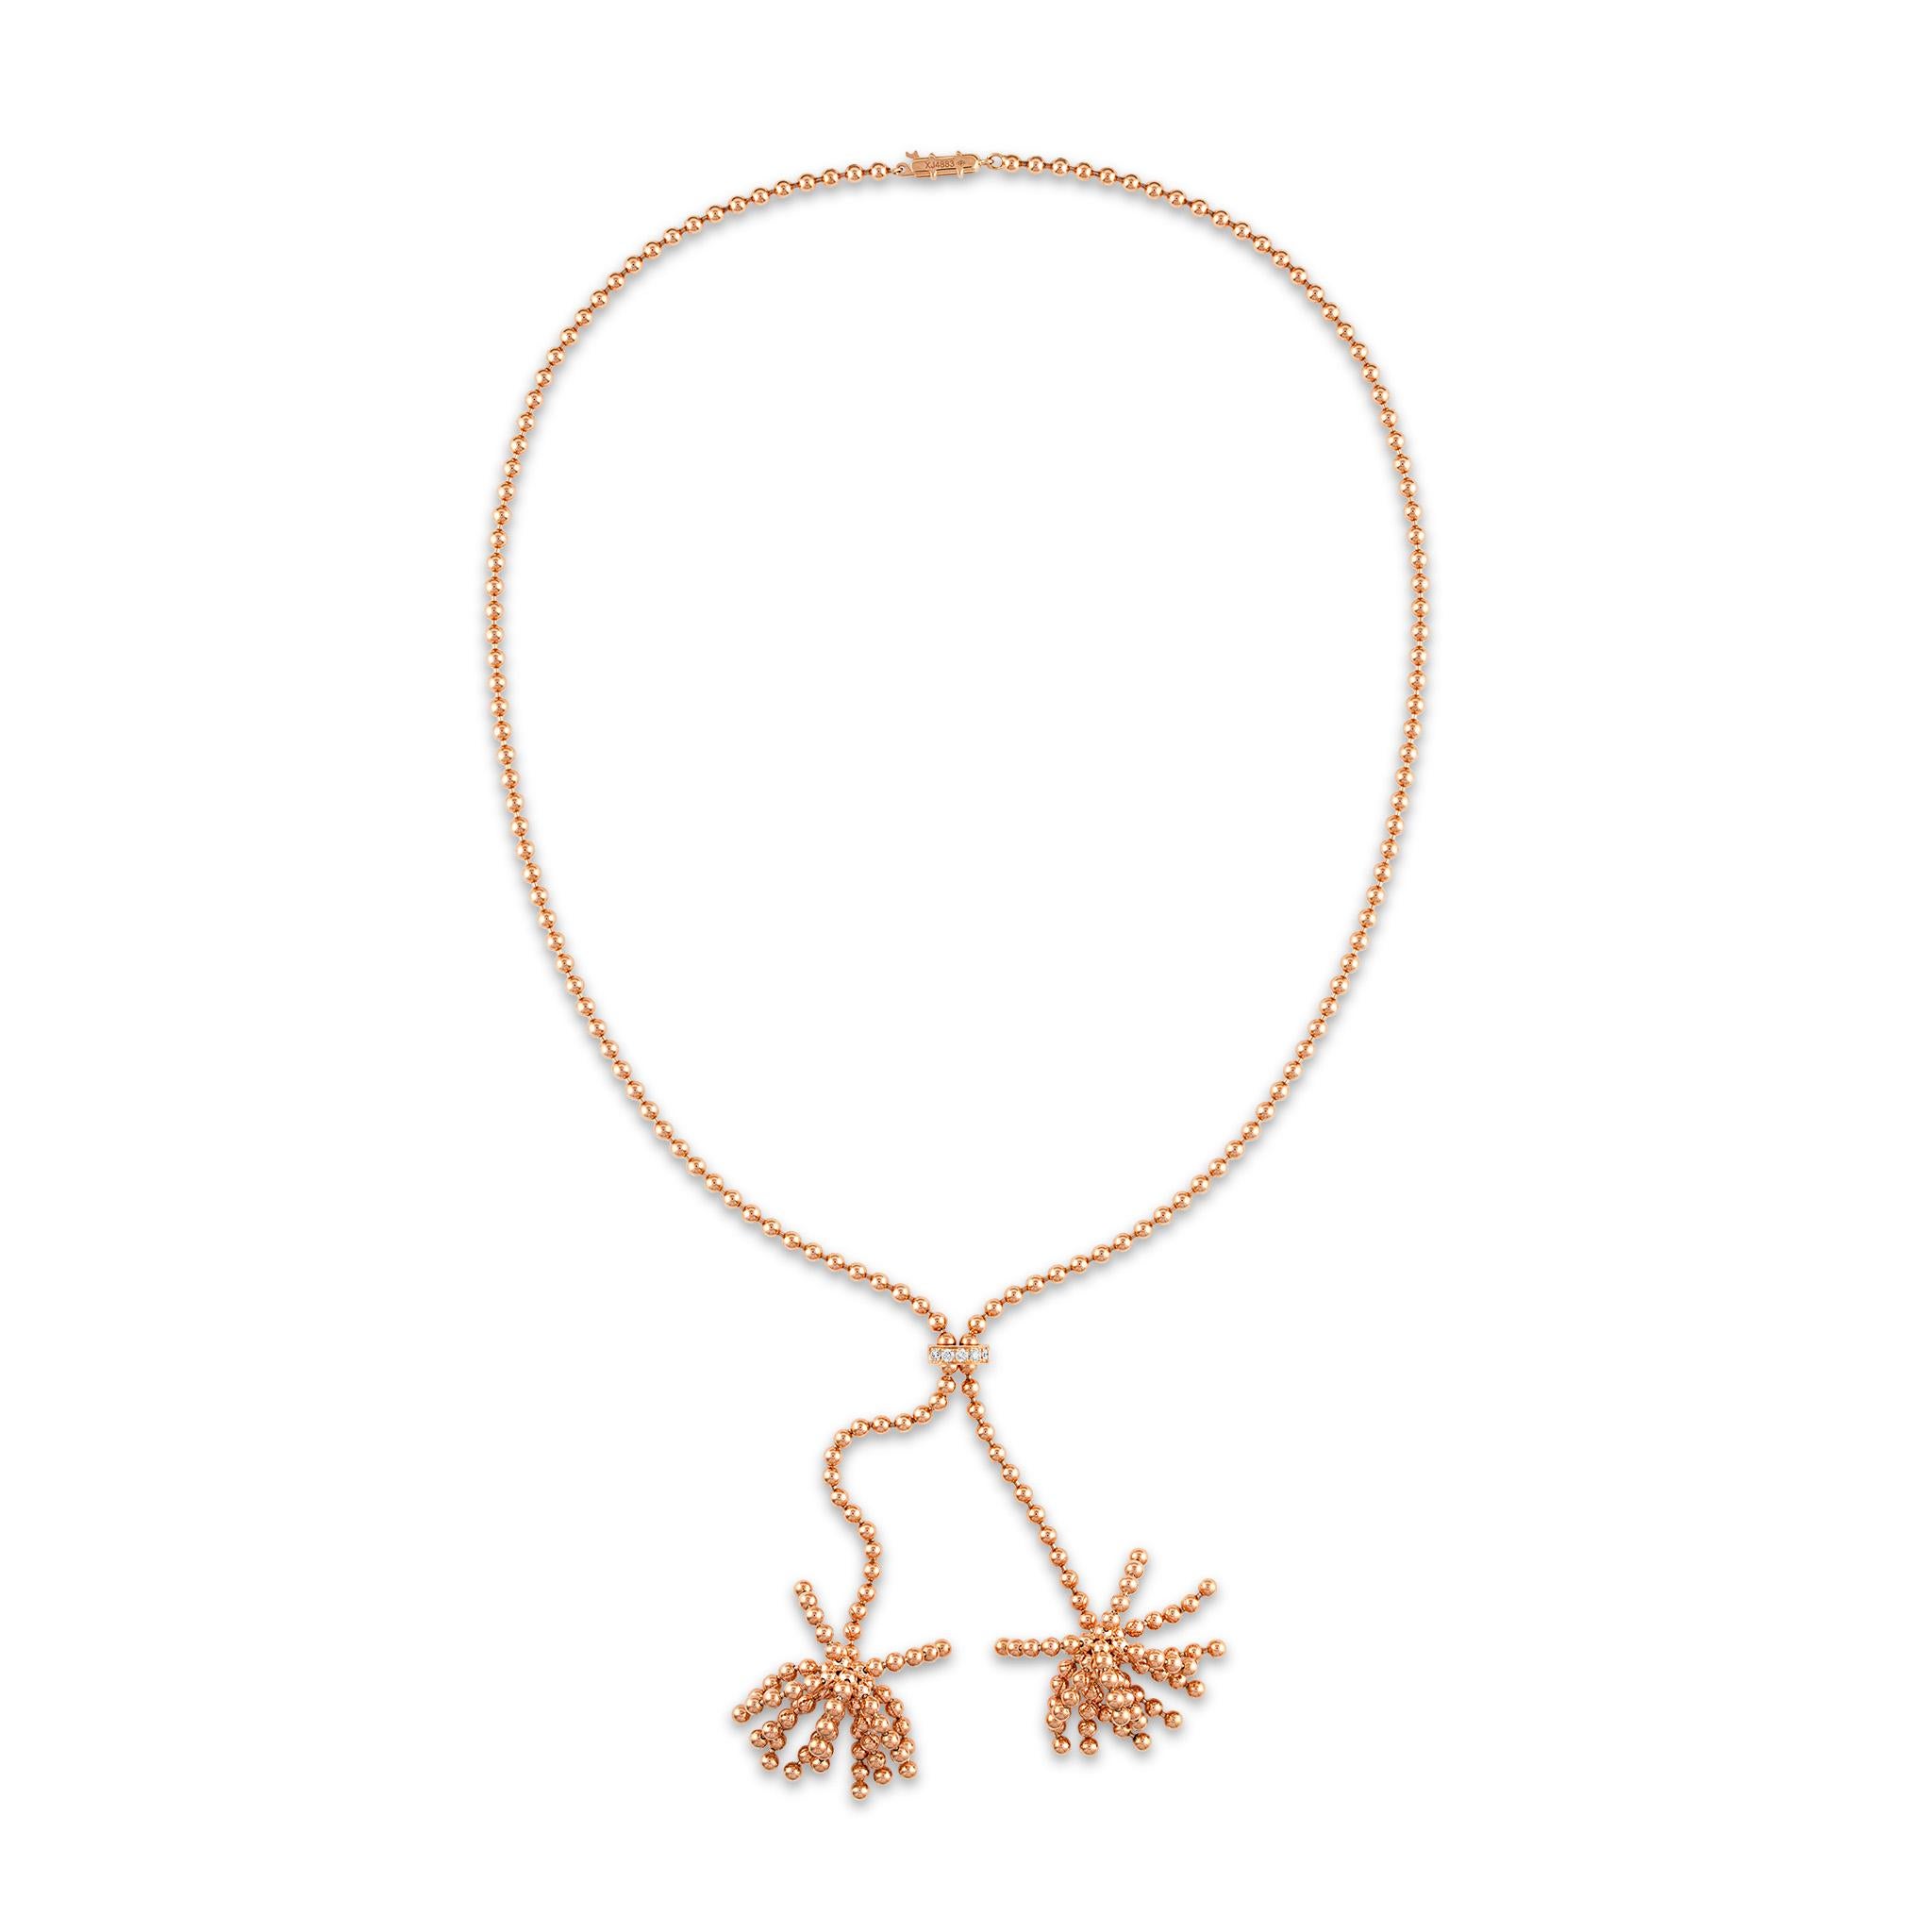 METAL TYPE: 18K Rose Gold
TOTAL WEIGHT: 41.5g
STONE WEIGHT: 0.14ct twd
NECKLACE LENGTH: 19